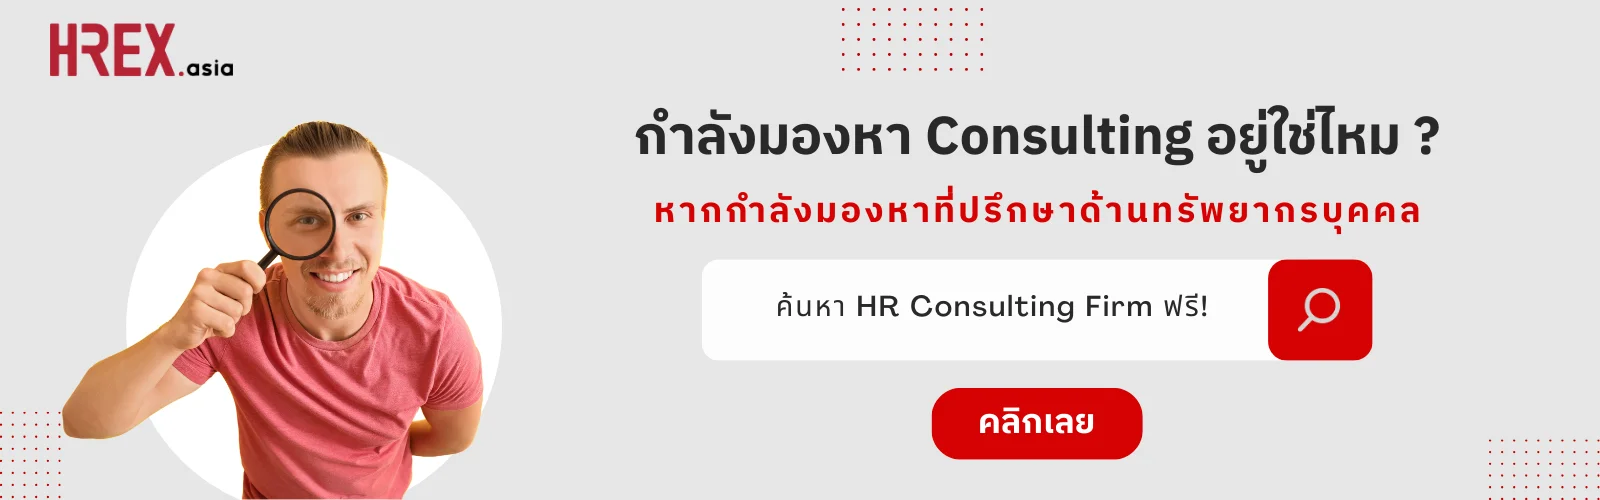 CTA HR Consulting Firm